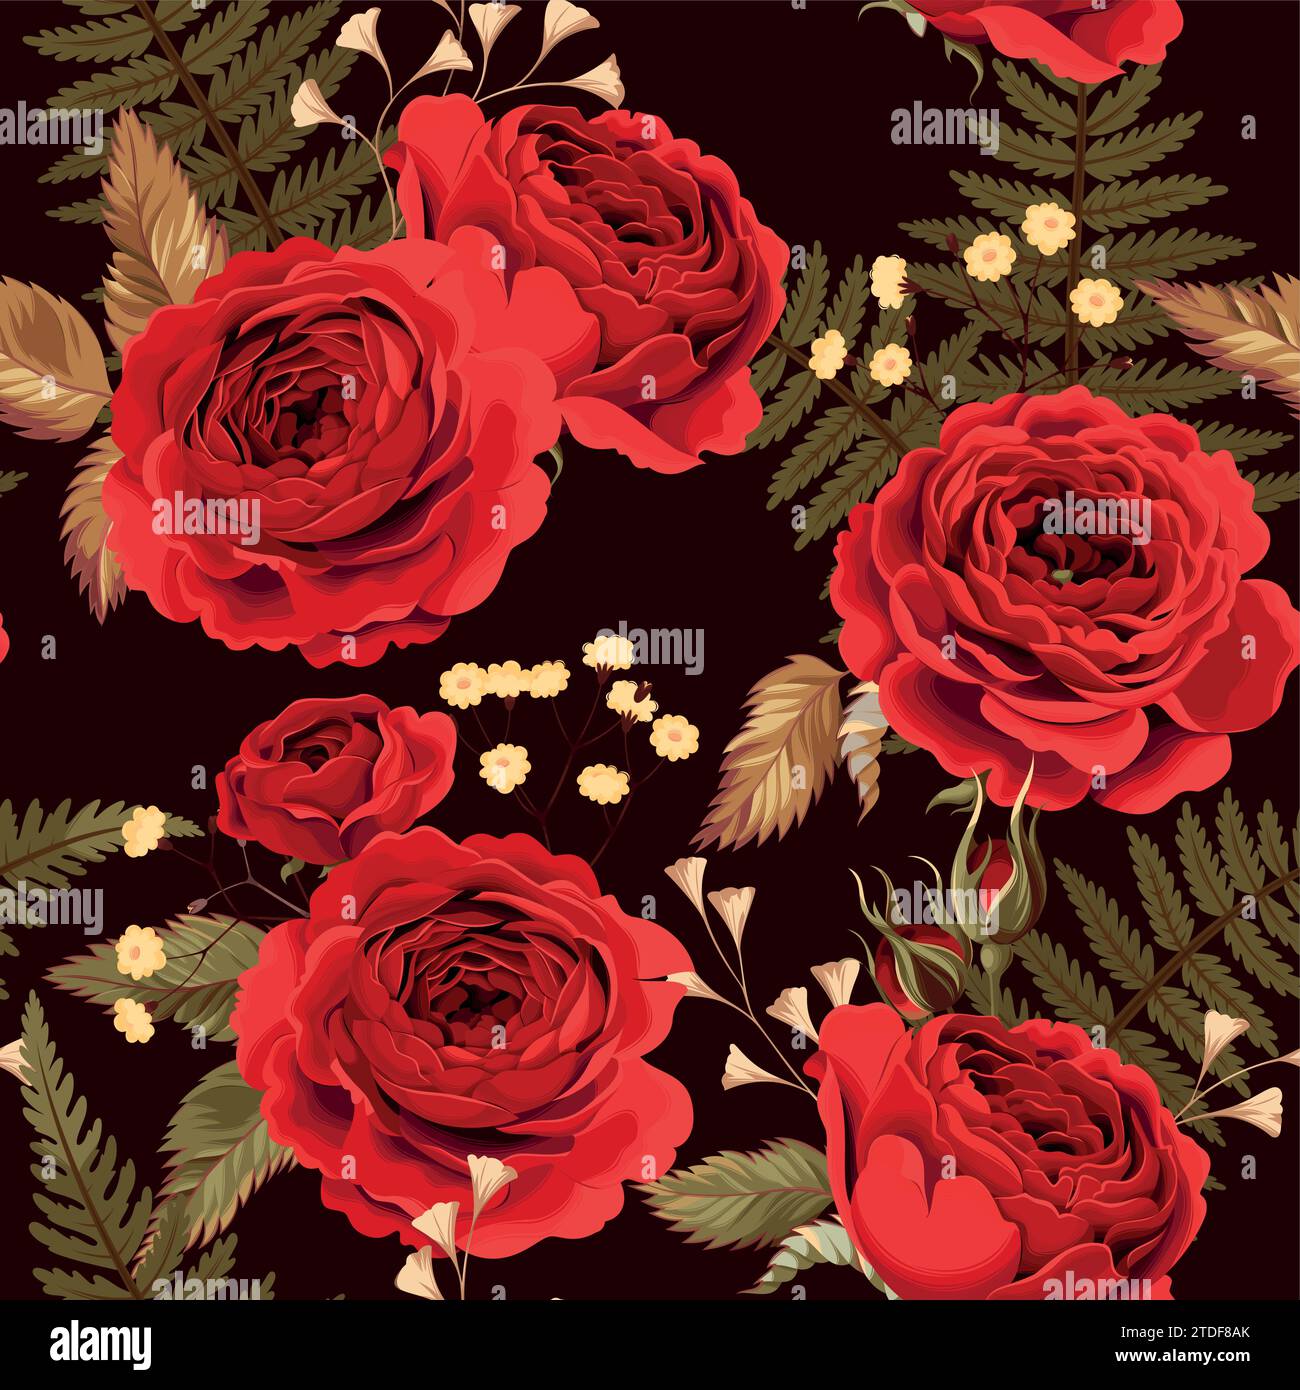 Seamless pattern with red roses Stock Vector